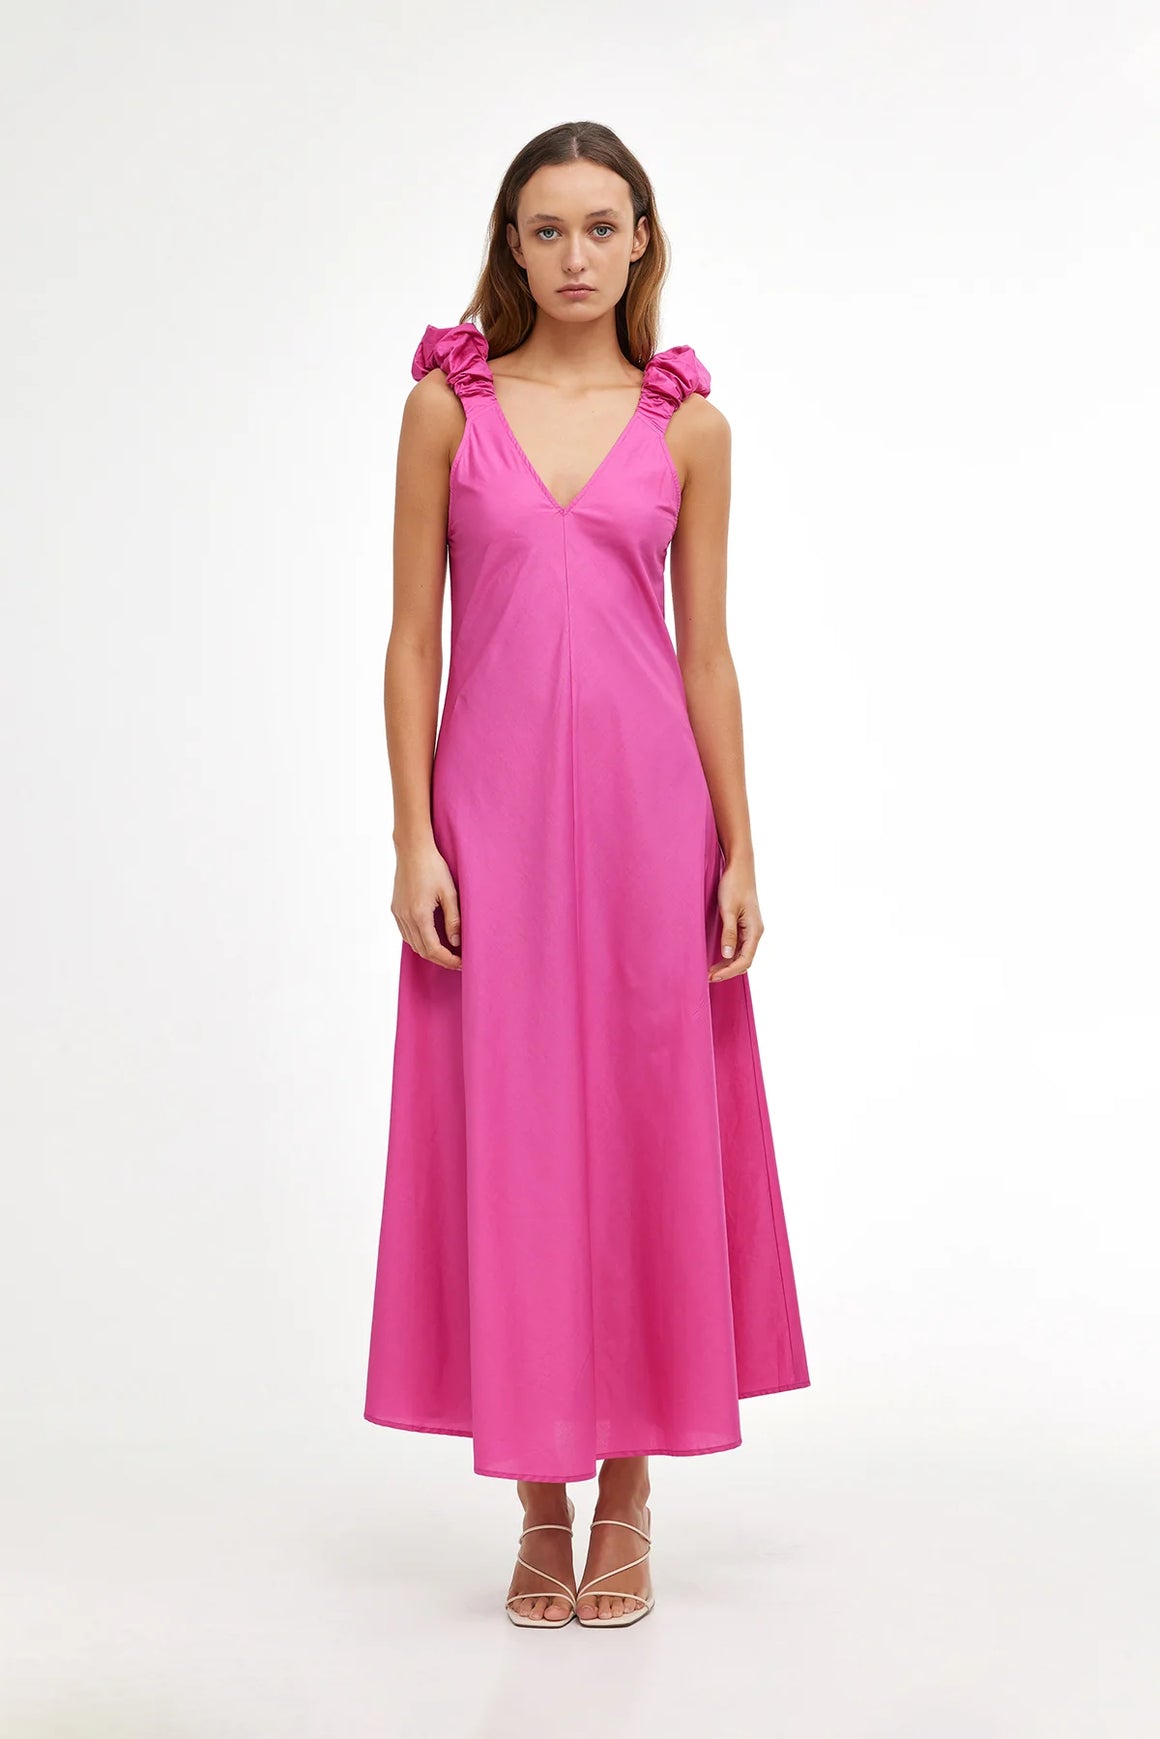 Candy pink cotton maxi dress with ruched shoulder straps